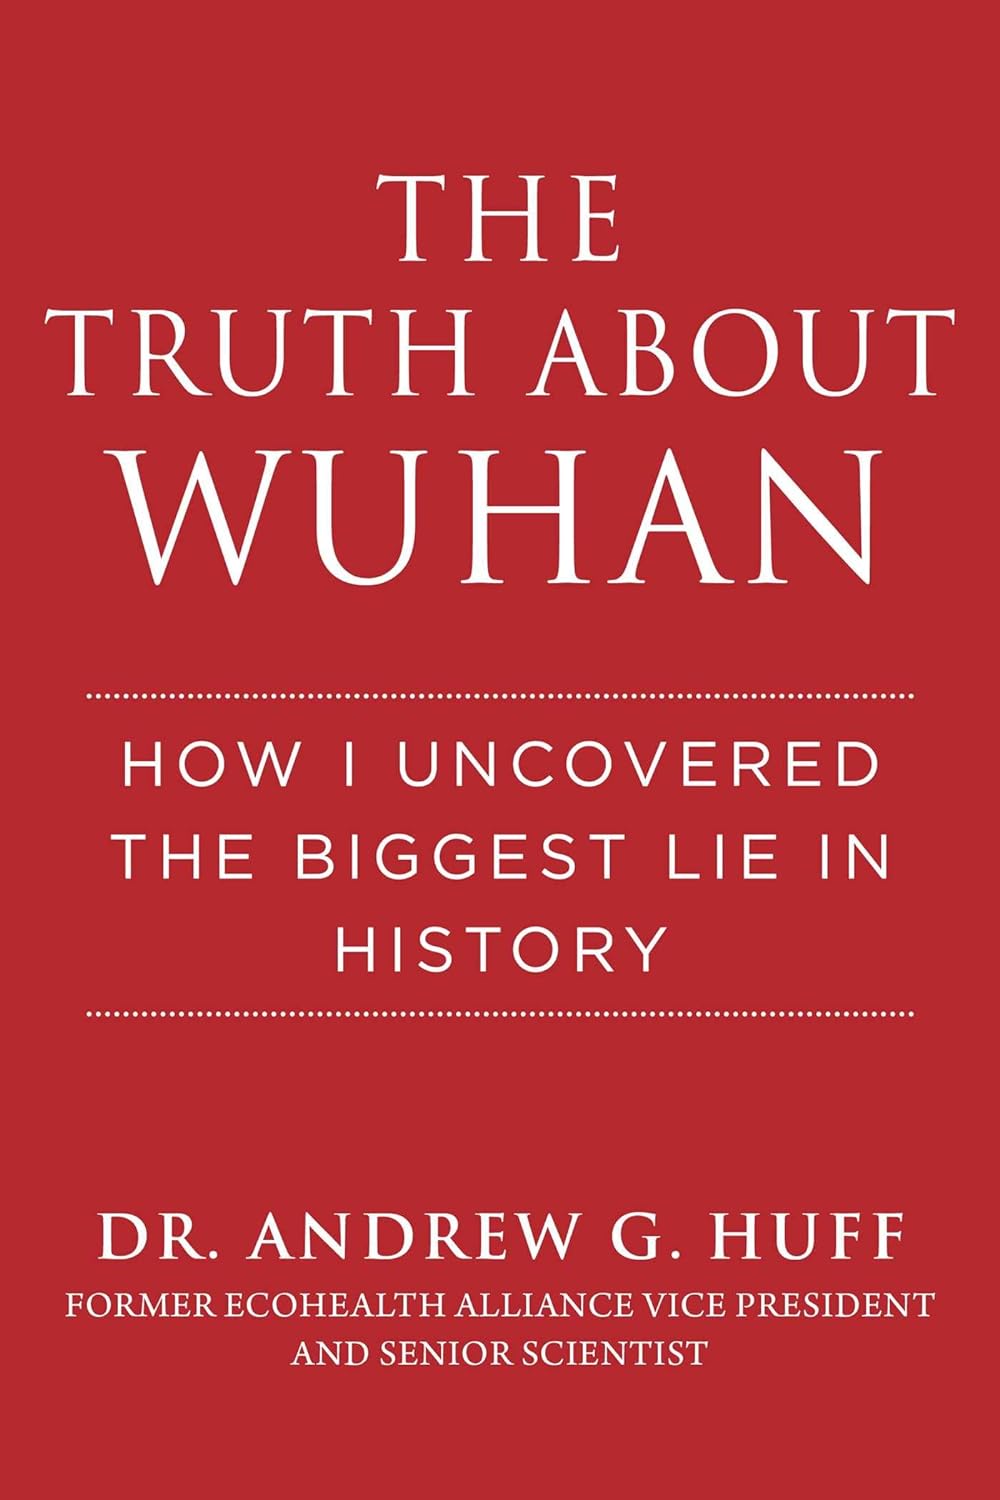 Review: “The Truth About Wuhan”  By Dr. Andrew G. Huff